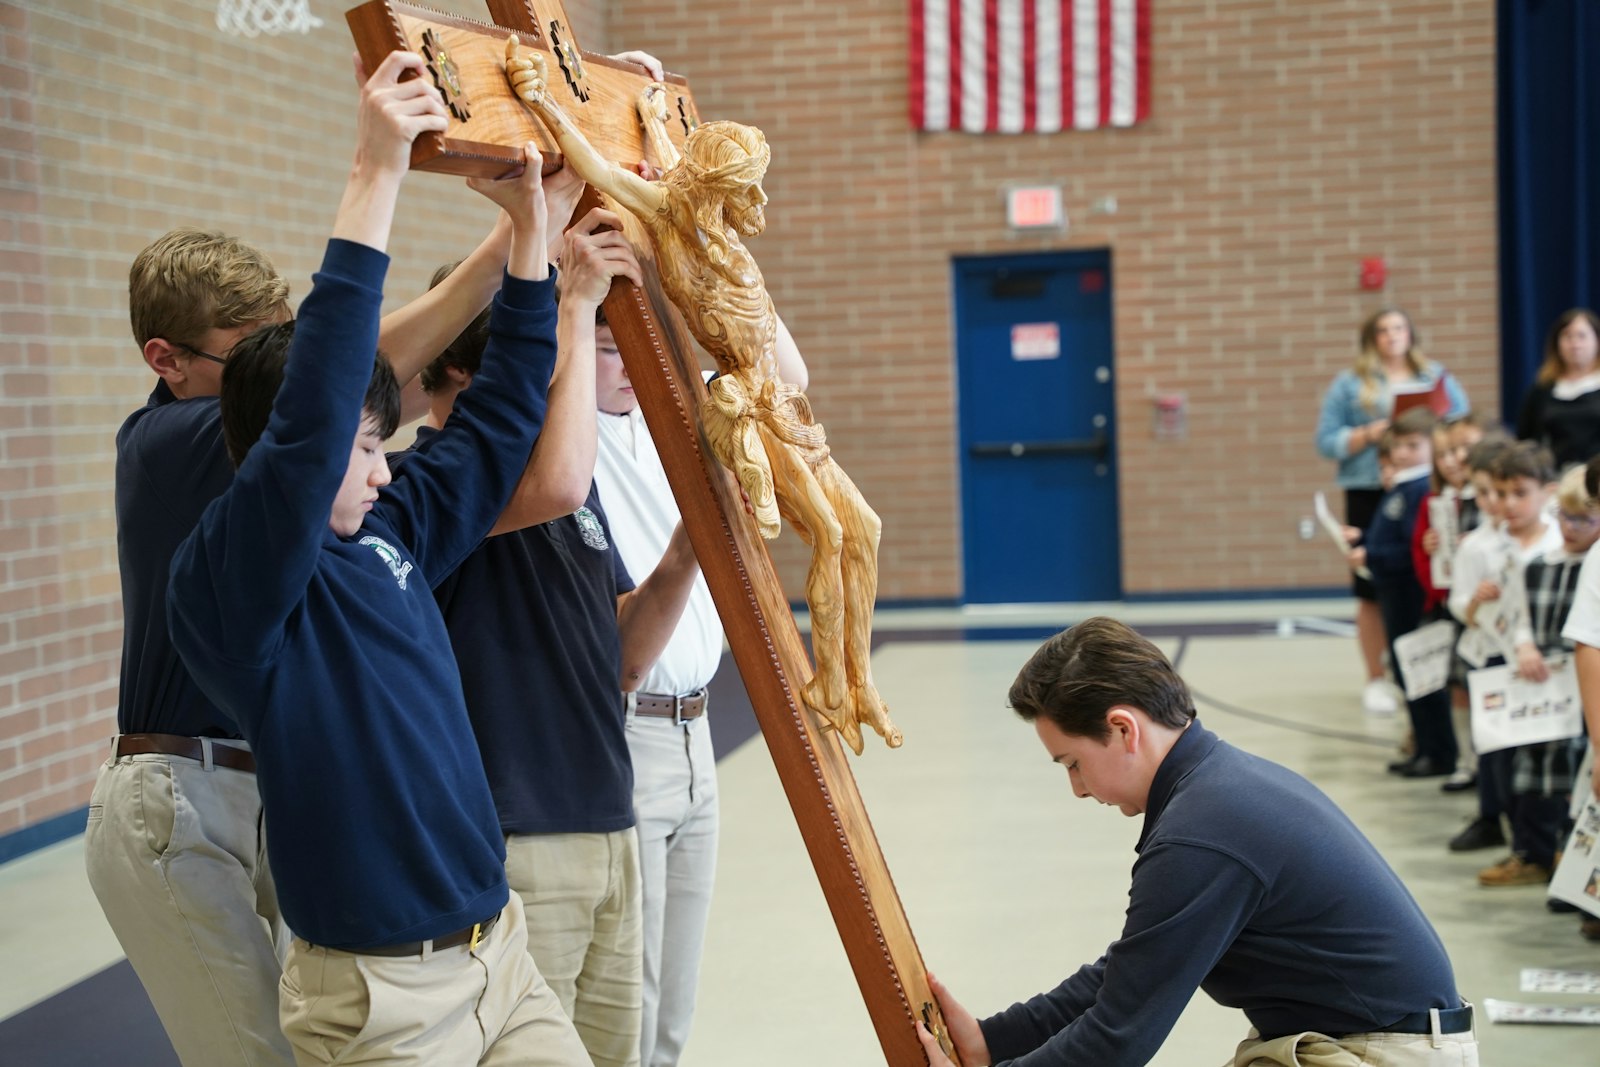 St. Mary School students stand the crucifix up in the school gymnasium, where students observed the Stations of the Cross. The original plan, to process from the school to nearby St. Peter Parish, was scuttled because of a weather forecast that included severe thunderstorms and a tornado watch.